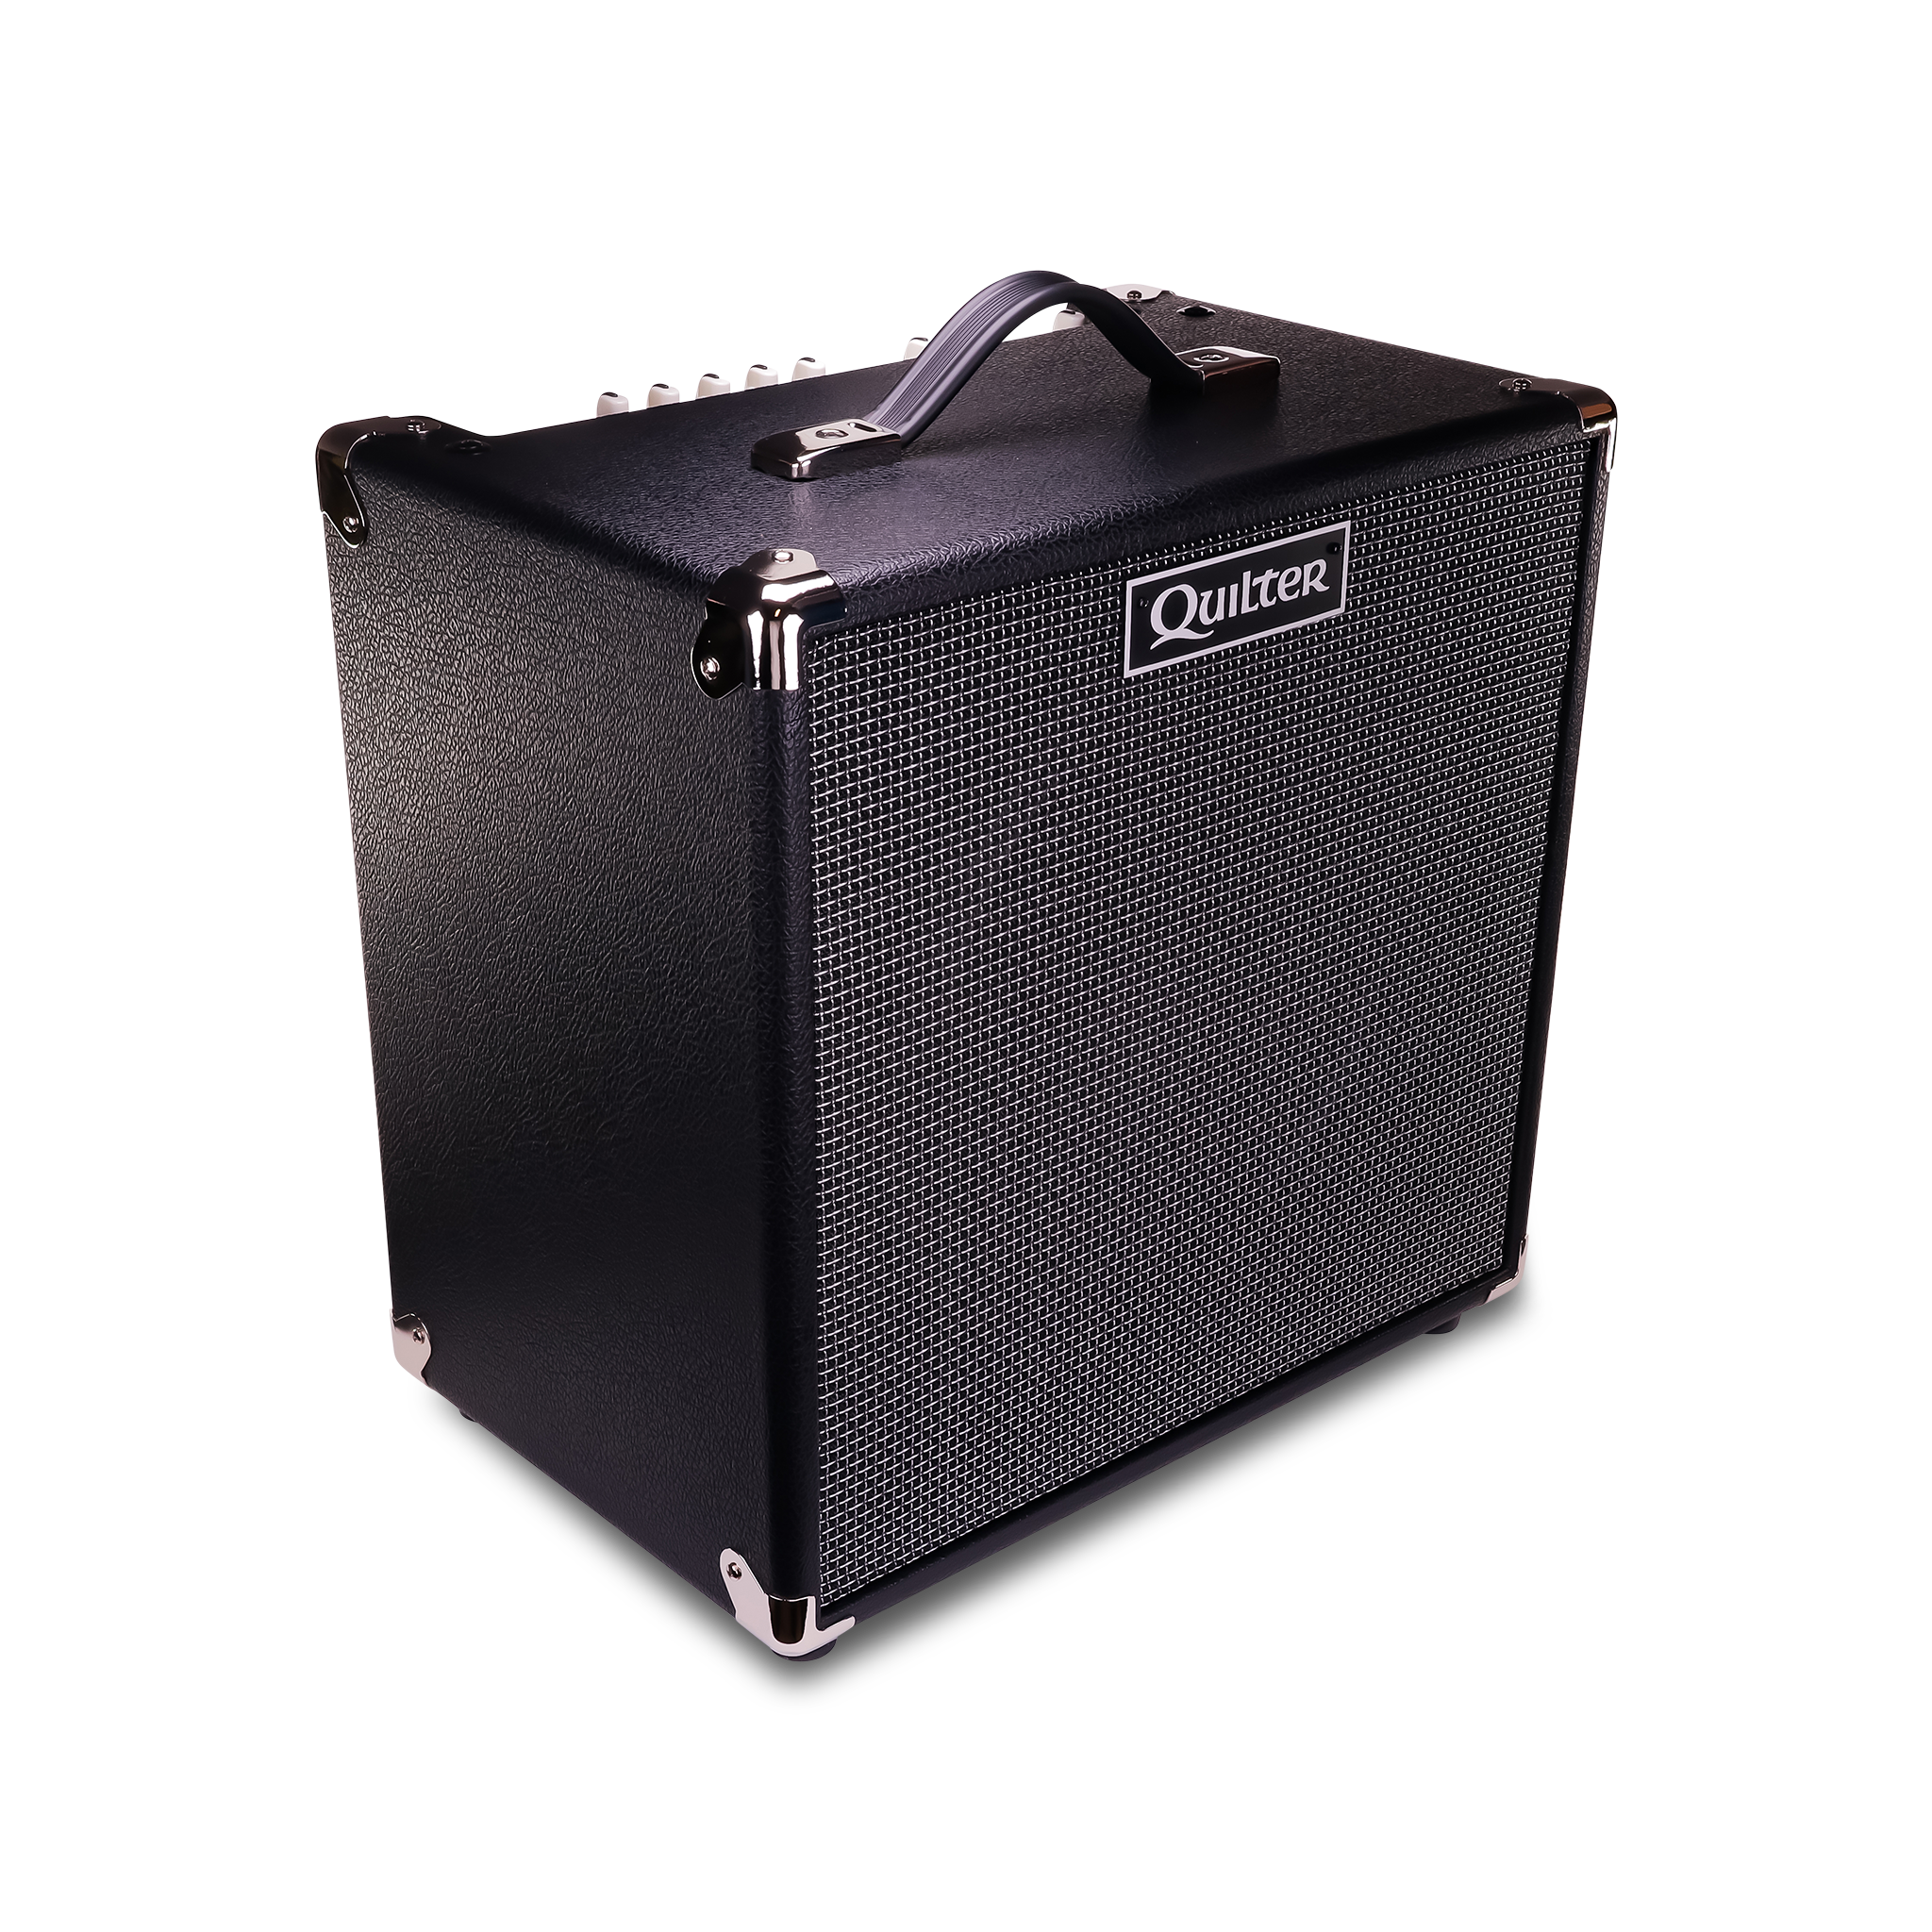 Quilter Aviator Cub 50w Combo amp